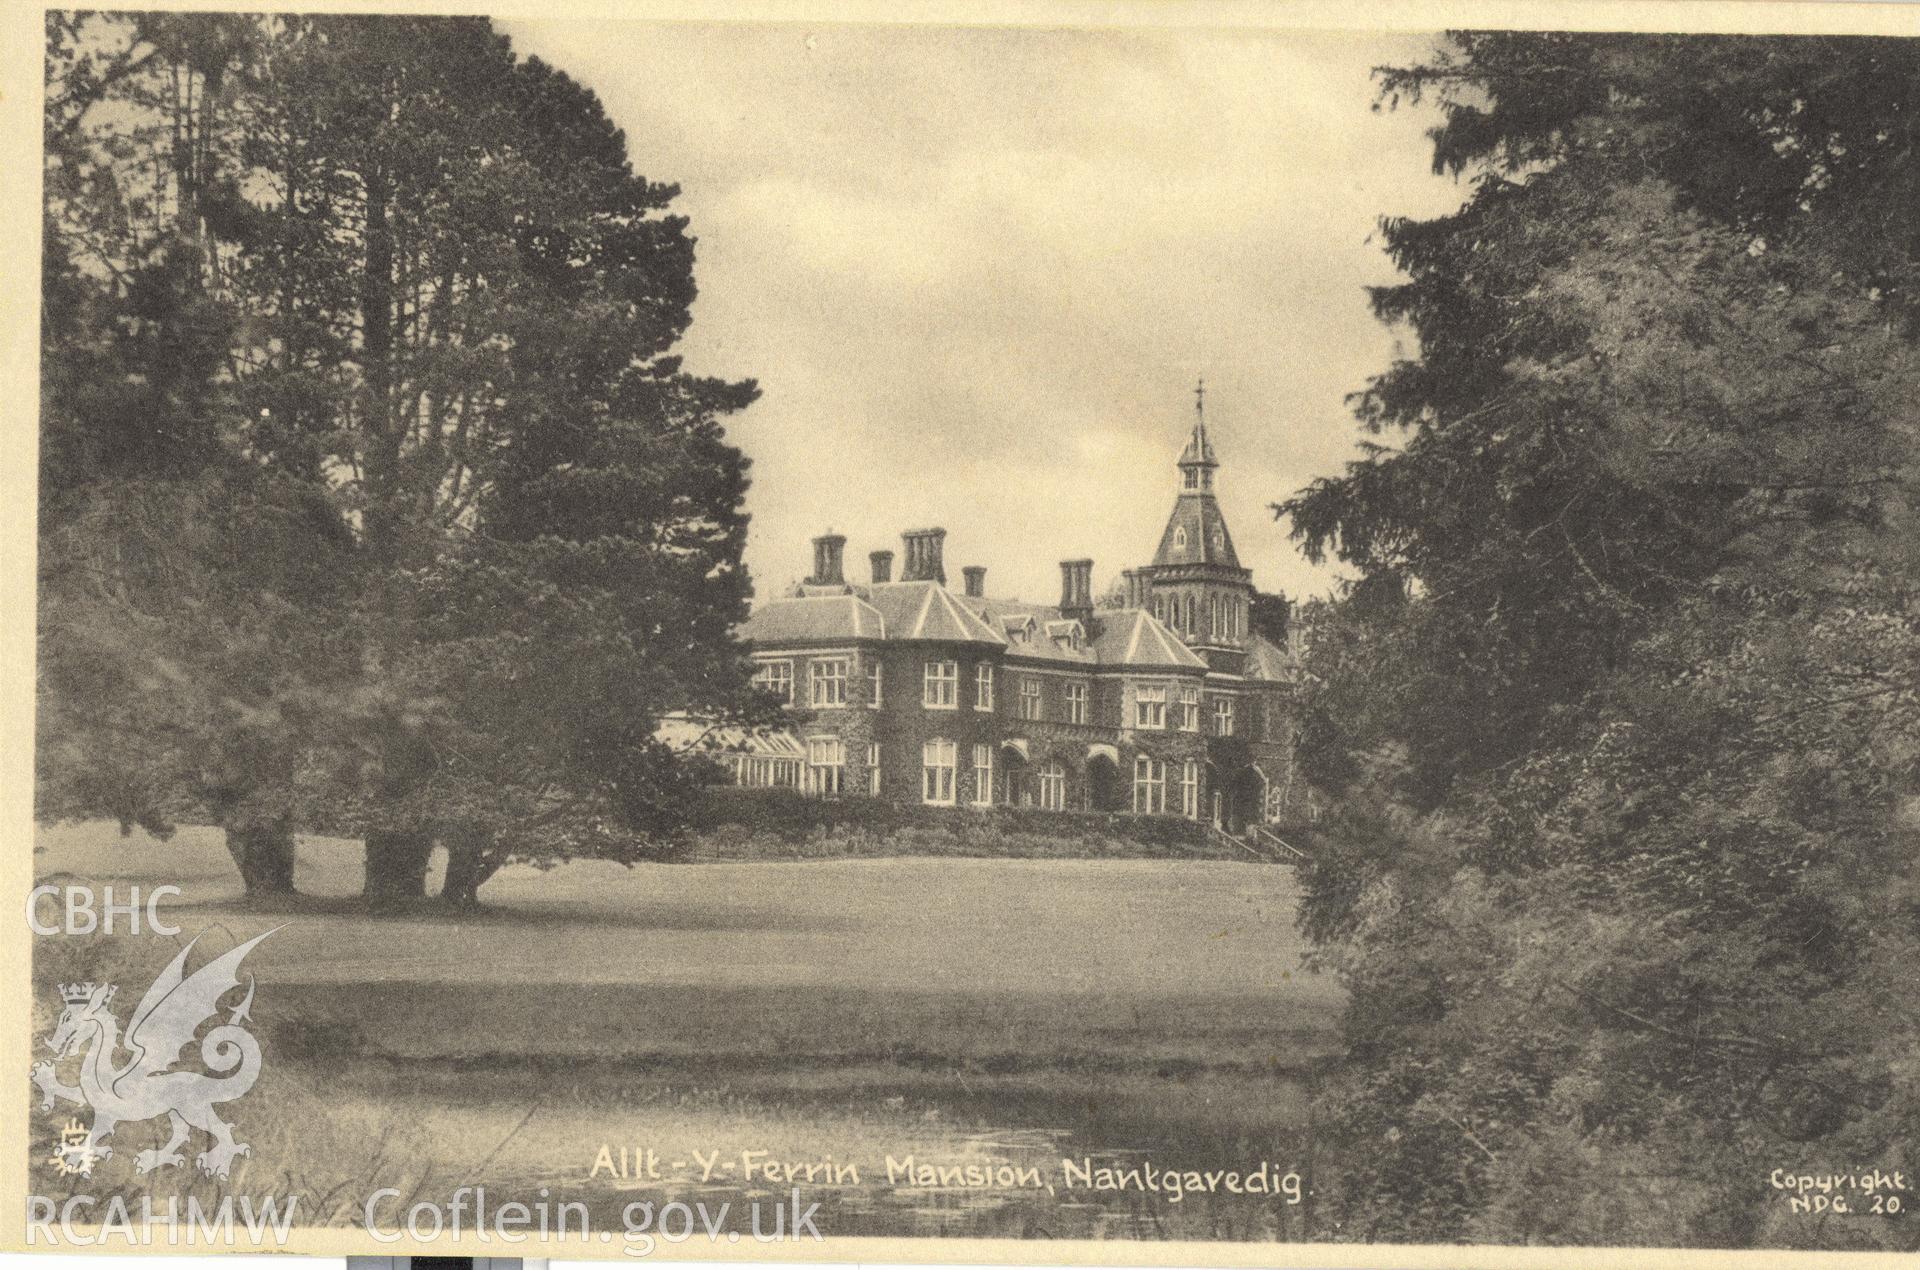 Digitised postcard image of Alltyferin House, Llanegwad, Raphael Tuck and Sons Ltd. Produced by Parks and Gardens Data Services, from an original item in the Peter Davis Collection at Parks and Gardens UK. We hold only web-resolution images of this collection, suitable for viewing on screen and for research purposes only. We do not hold the original images, or publication quality scans.